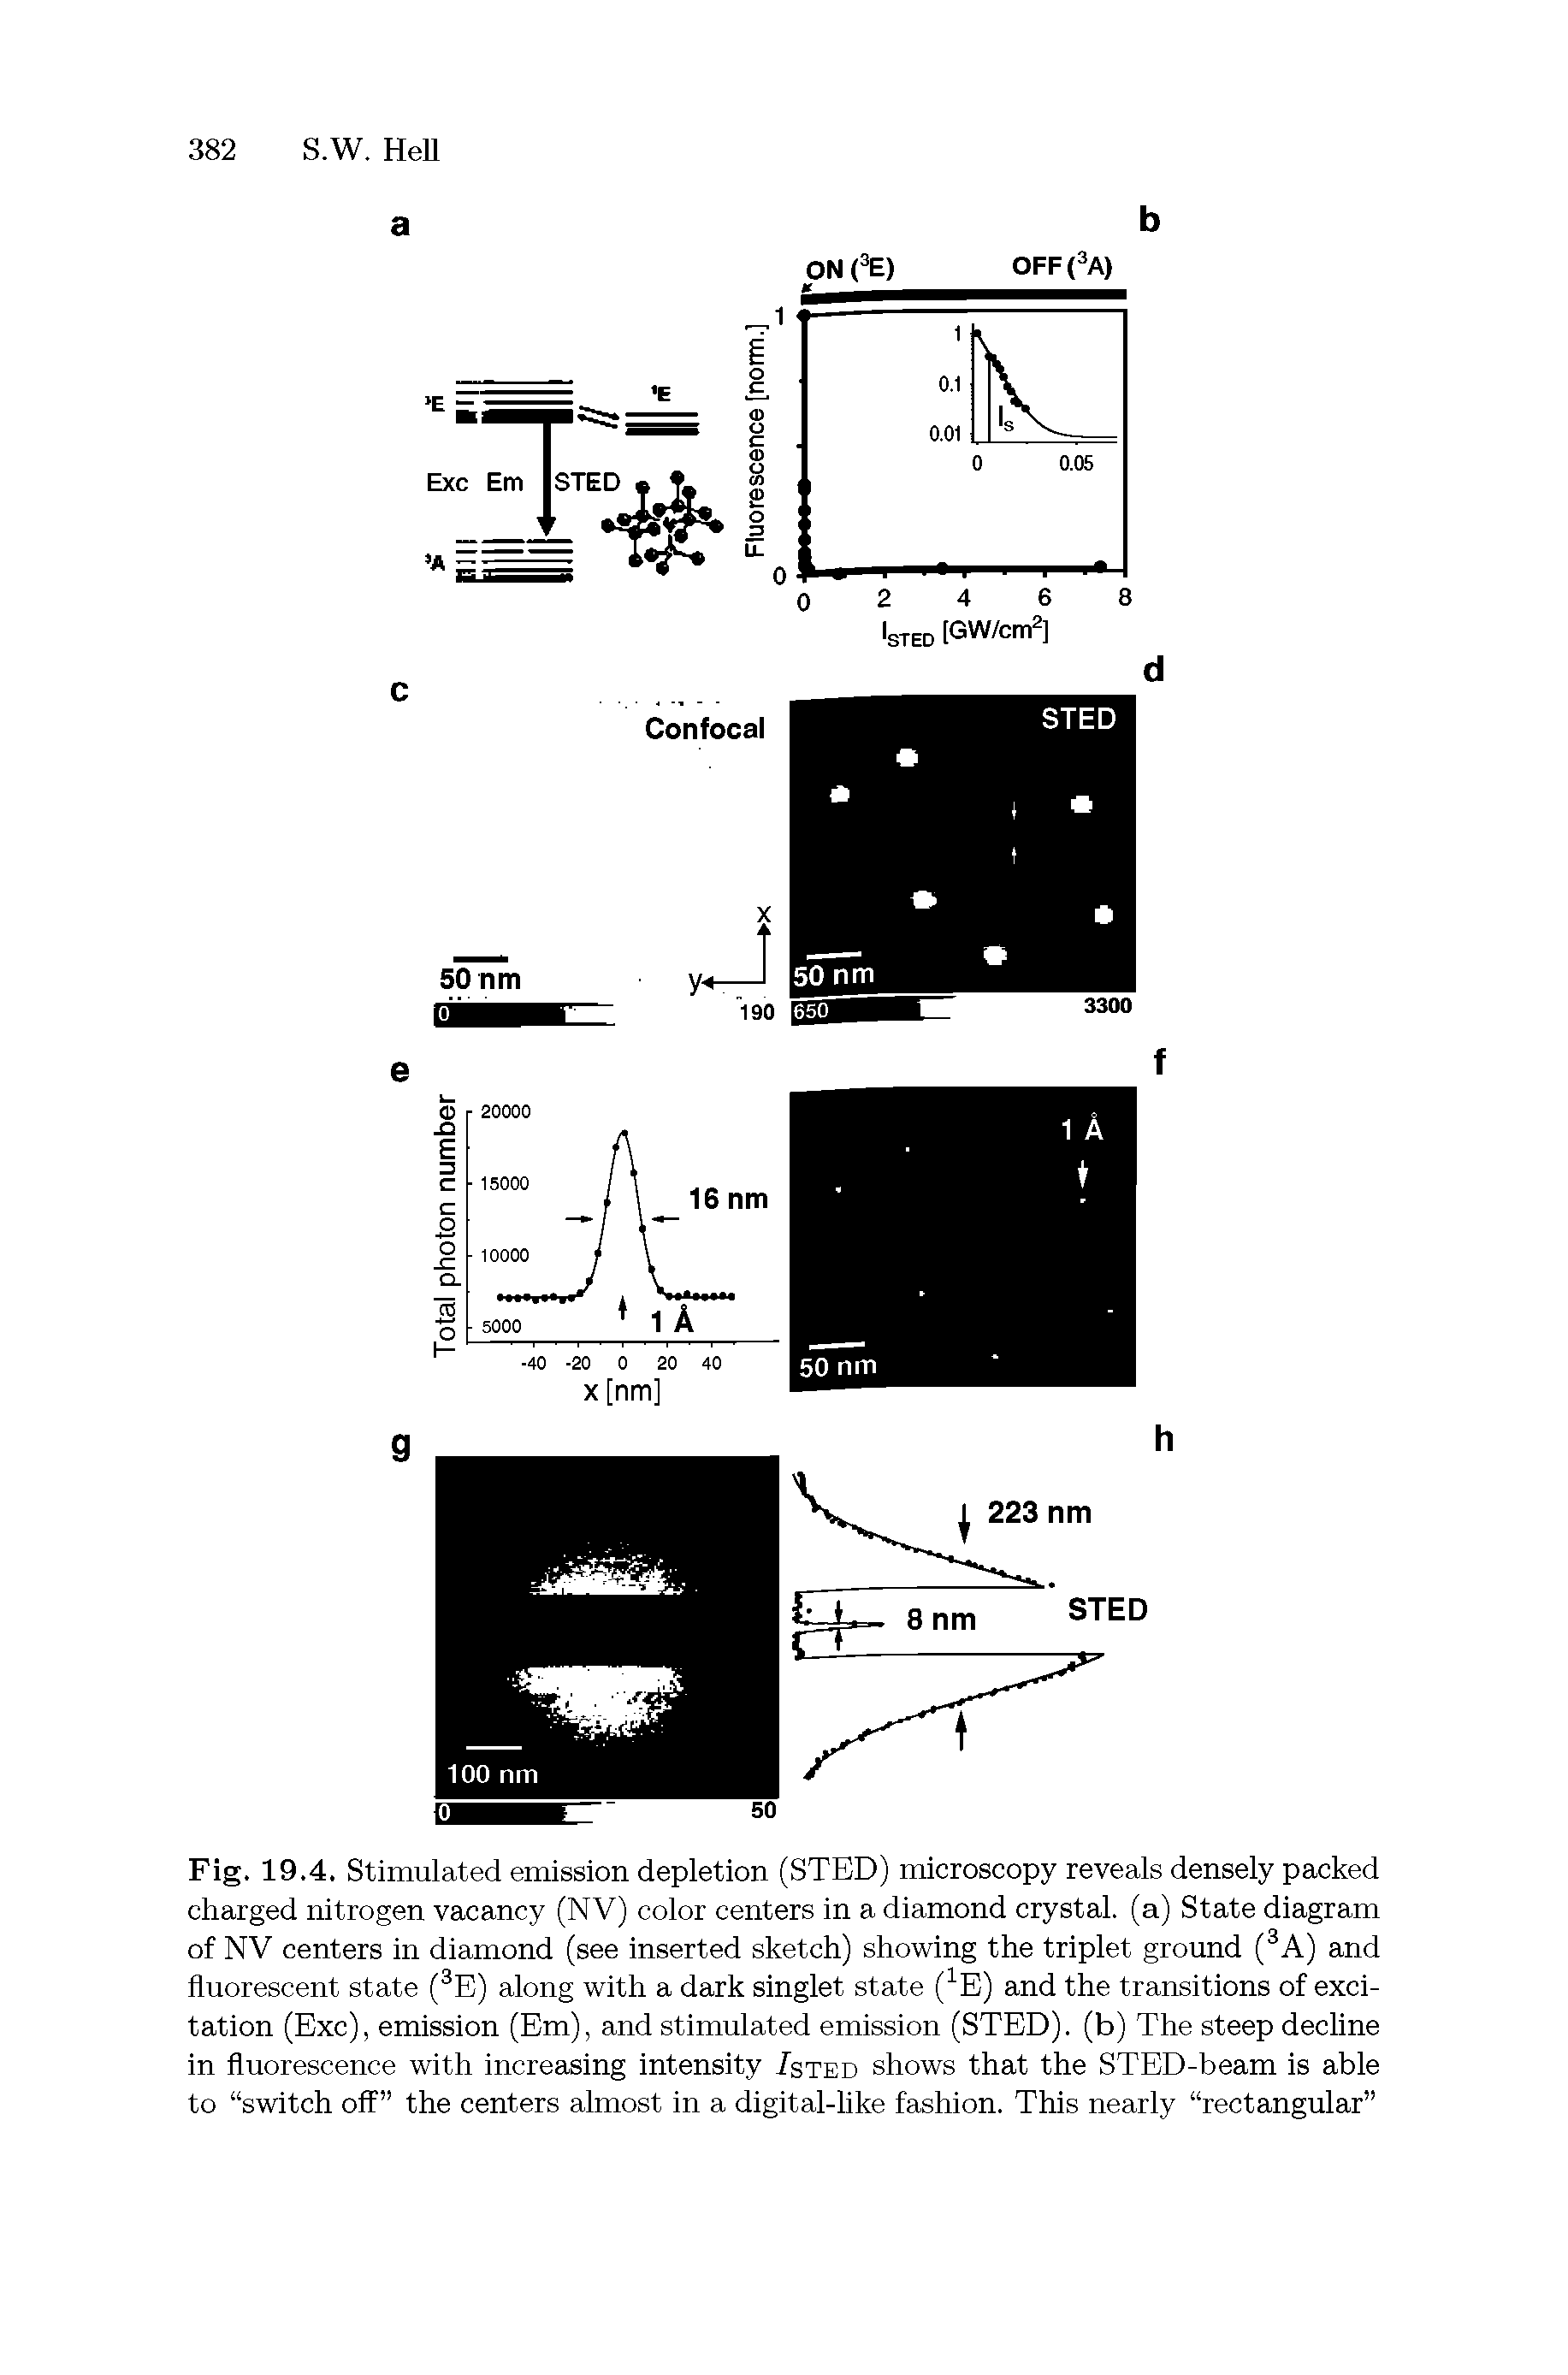 Fig. 19.4. Stimulated emission depletion (STED) microscopy reveals densely packed charged nitrogen vacancy (NV) color centers in a diamond crystal, (a) State diagram of NV centers in diamond (see inserted sketch) showing the triplet ground ( A) and fluorescent state ( E) along with a dark singlet state ( E) and the transitions of excitation (Exc), emission (Em), and stimulated emission (STED). (b) The steep decline in fluorescence with increasing intensity /sted shows that the STED-beam is able to switch off the centers almost in a digital-like fashion. This nearly rectangular ...